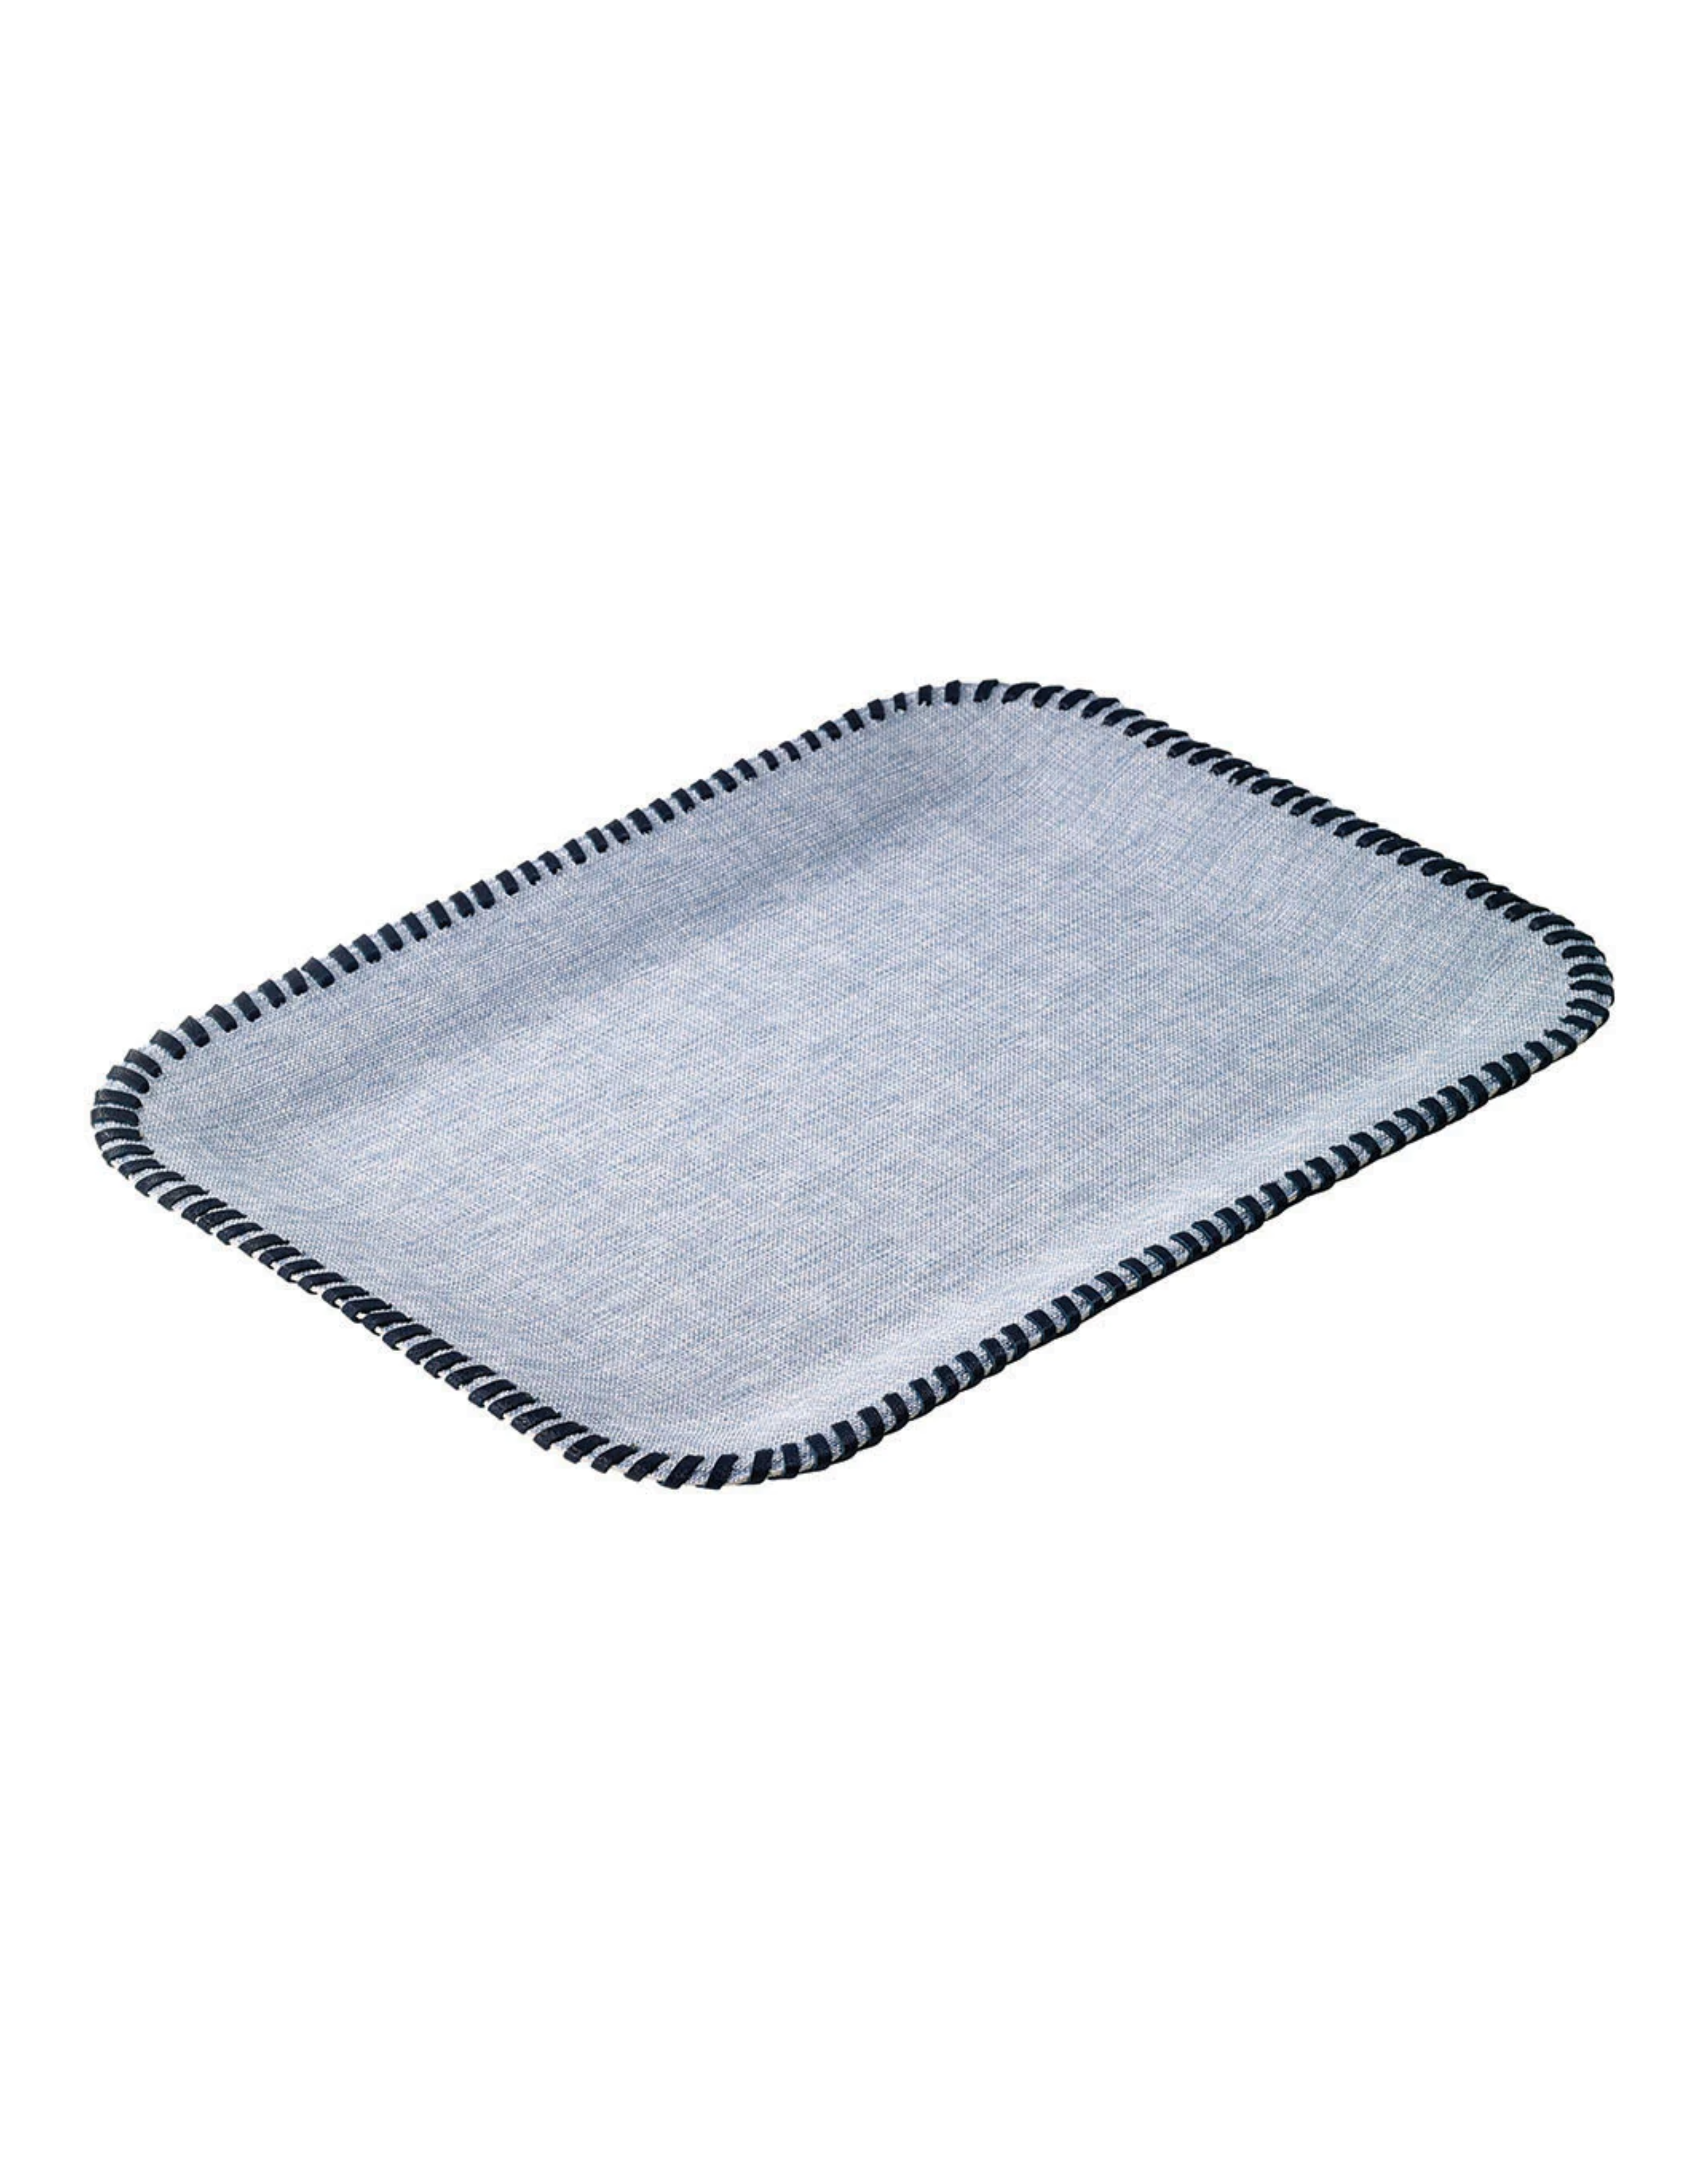 Whipstitch Flat Tray - Bluebell